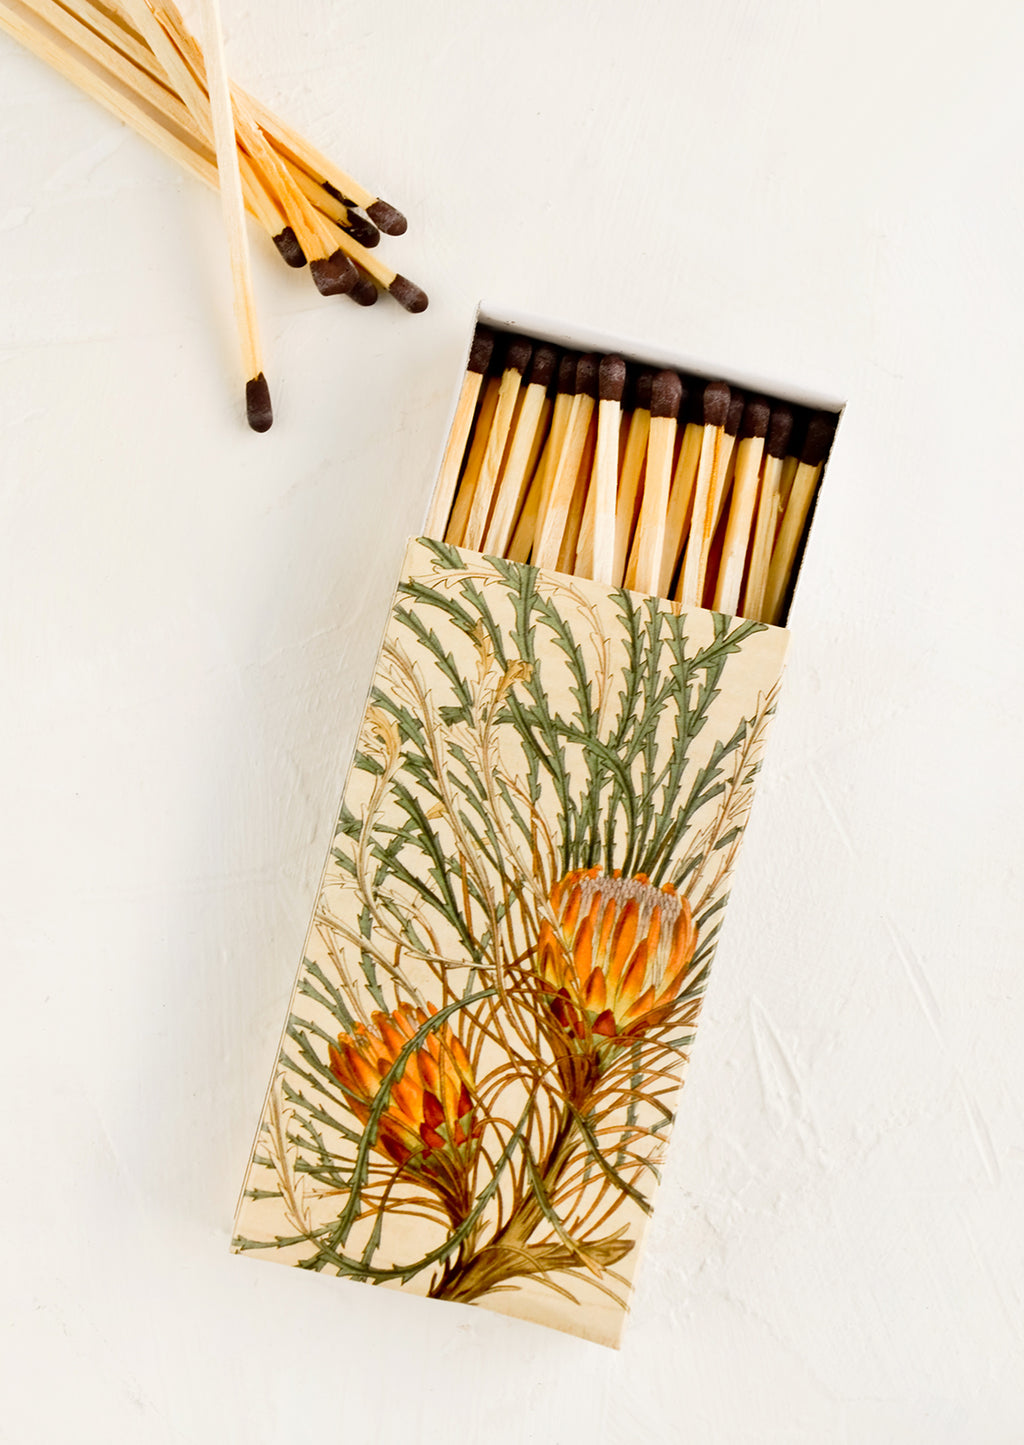 1: A matchbox with botanical protea print and brown-tipped long matches.